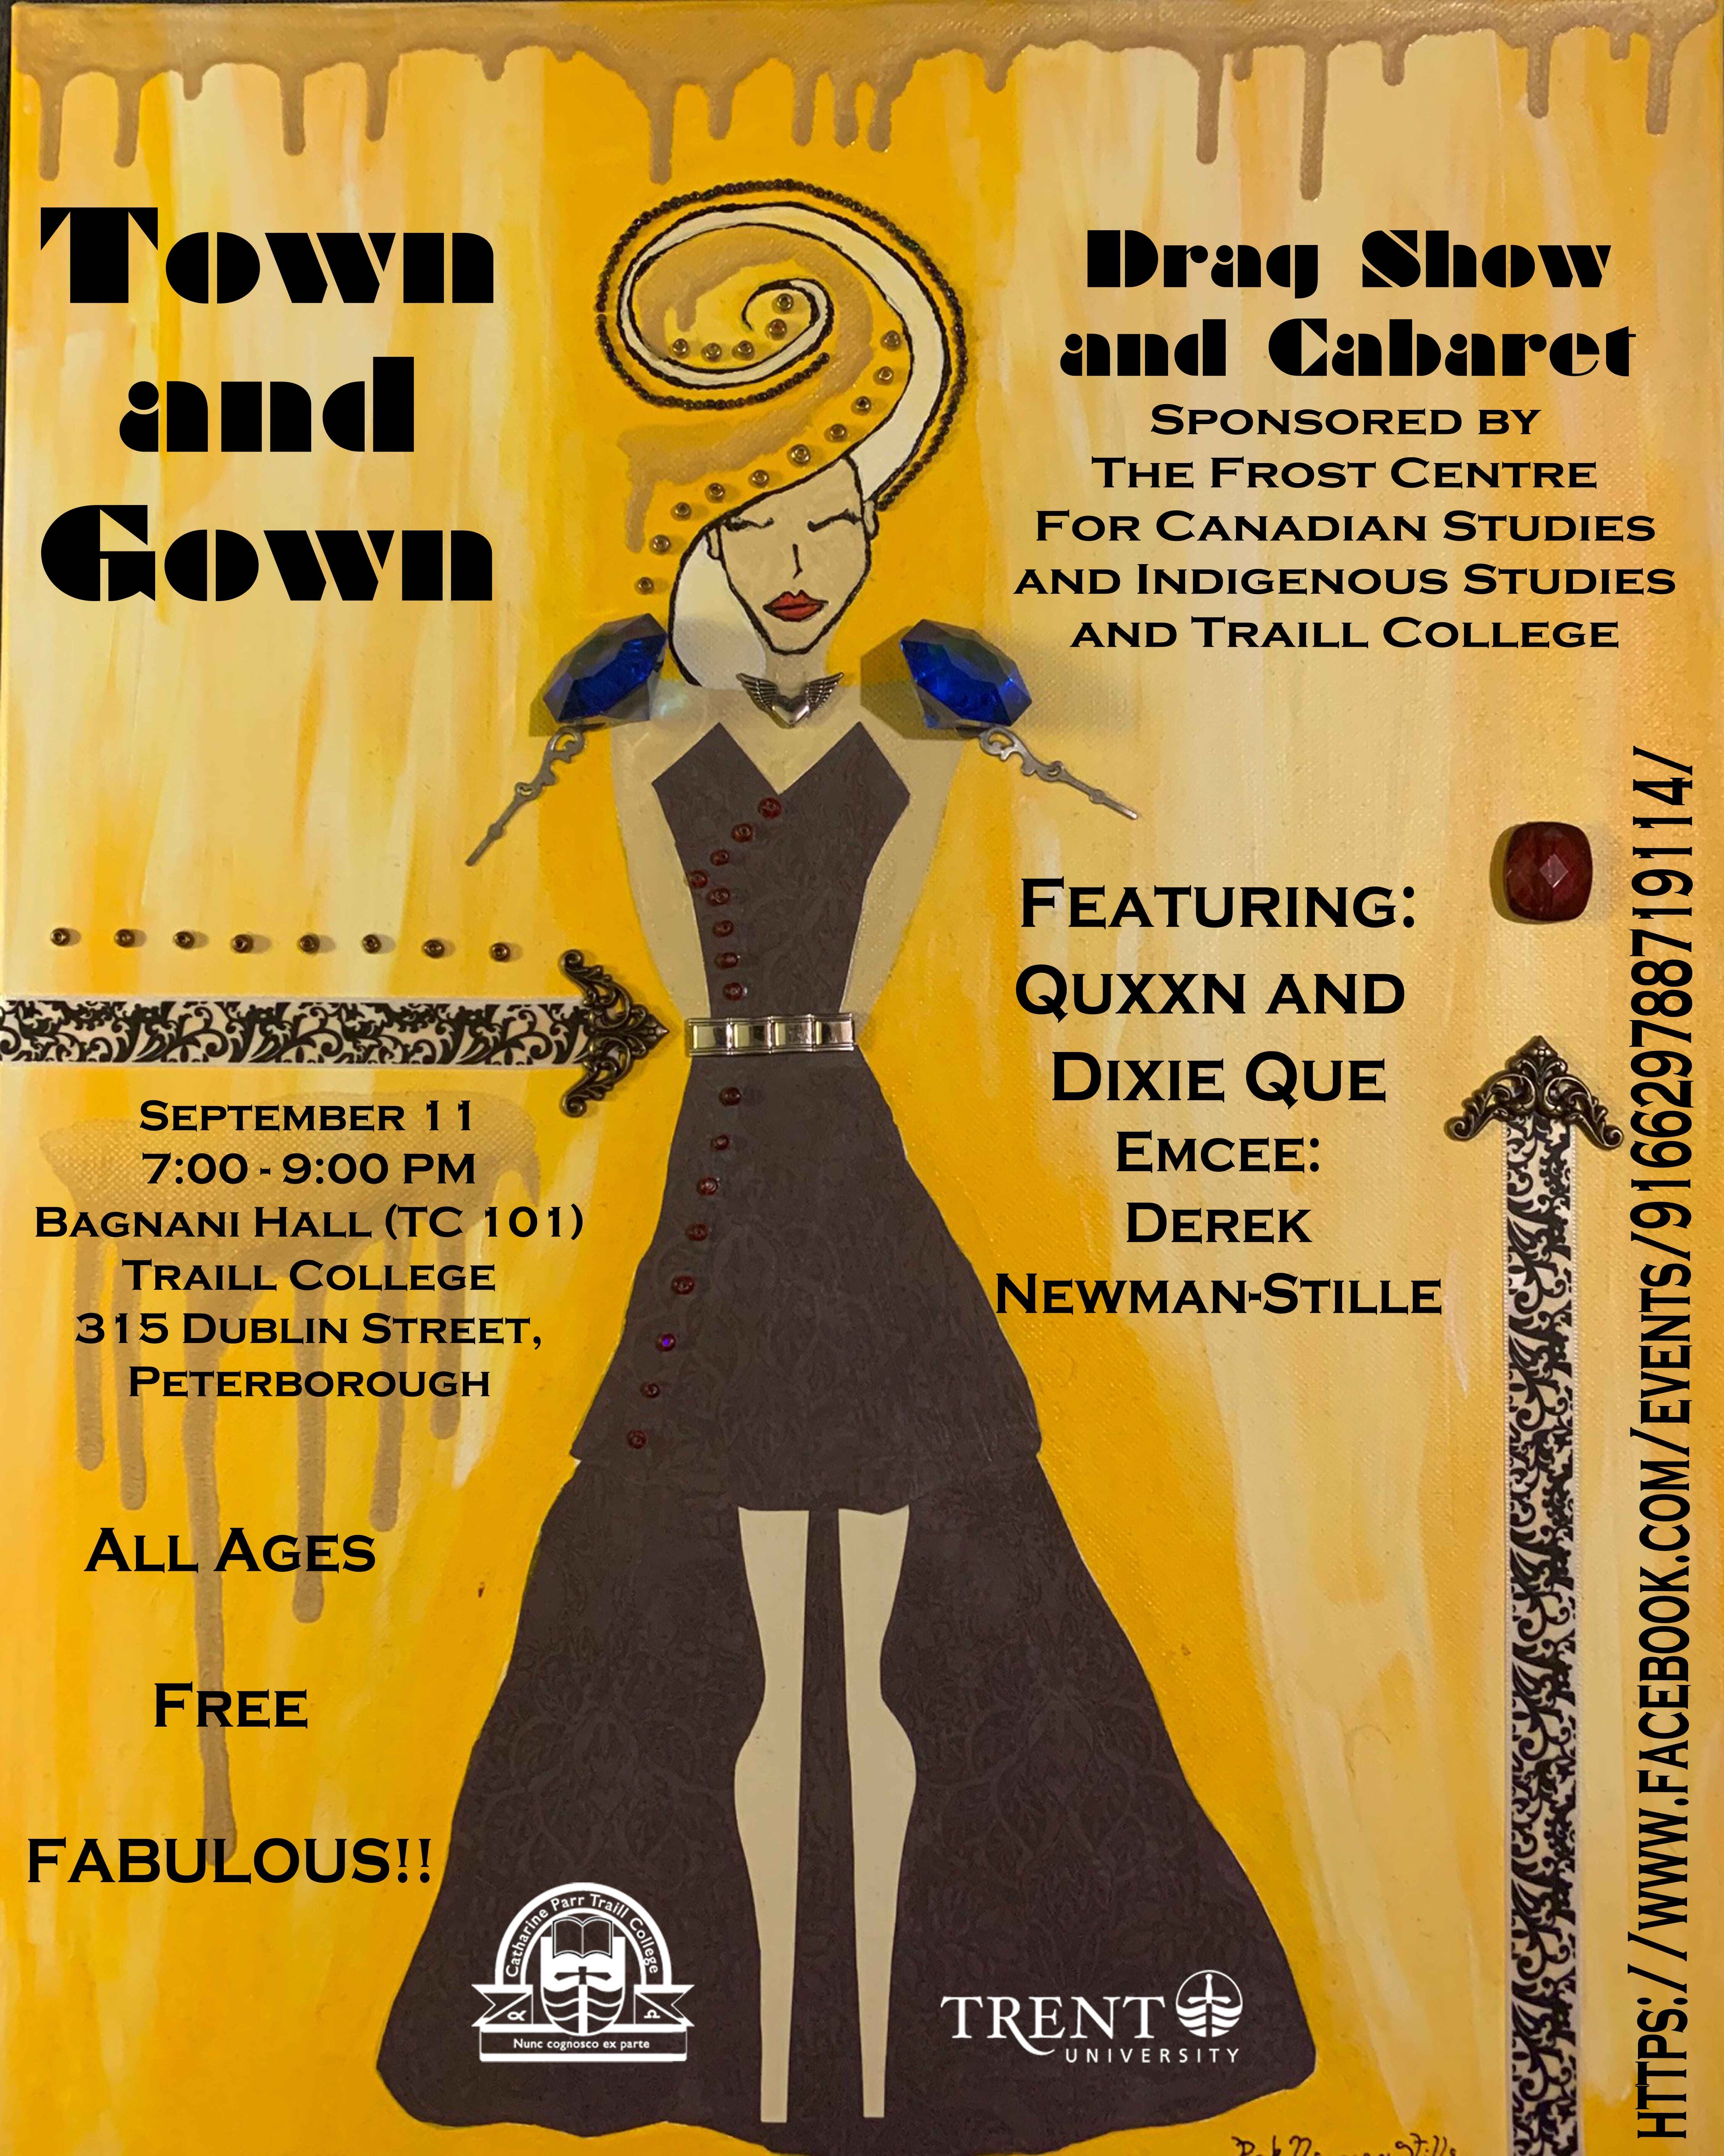 Town & Gown Drag Show and Cabaret 11 September 2019